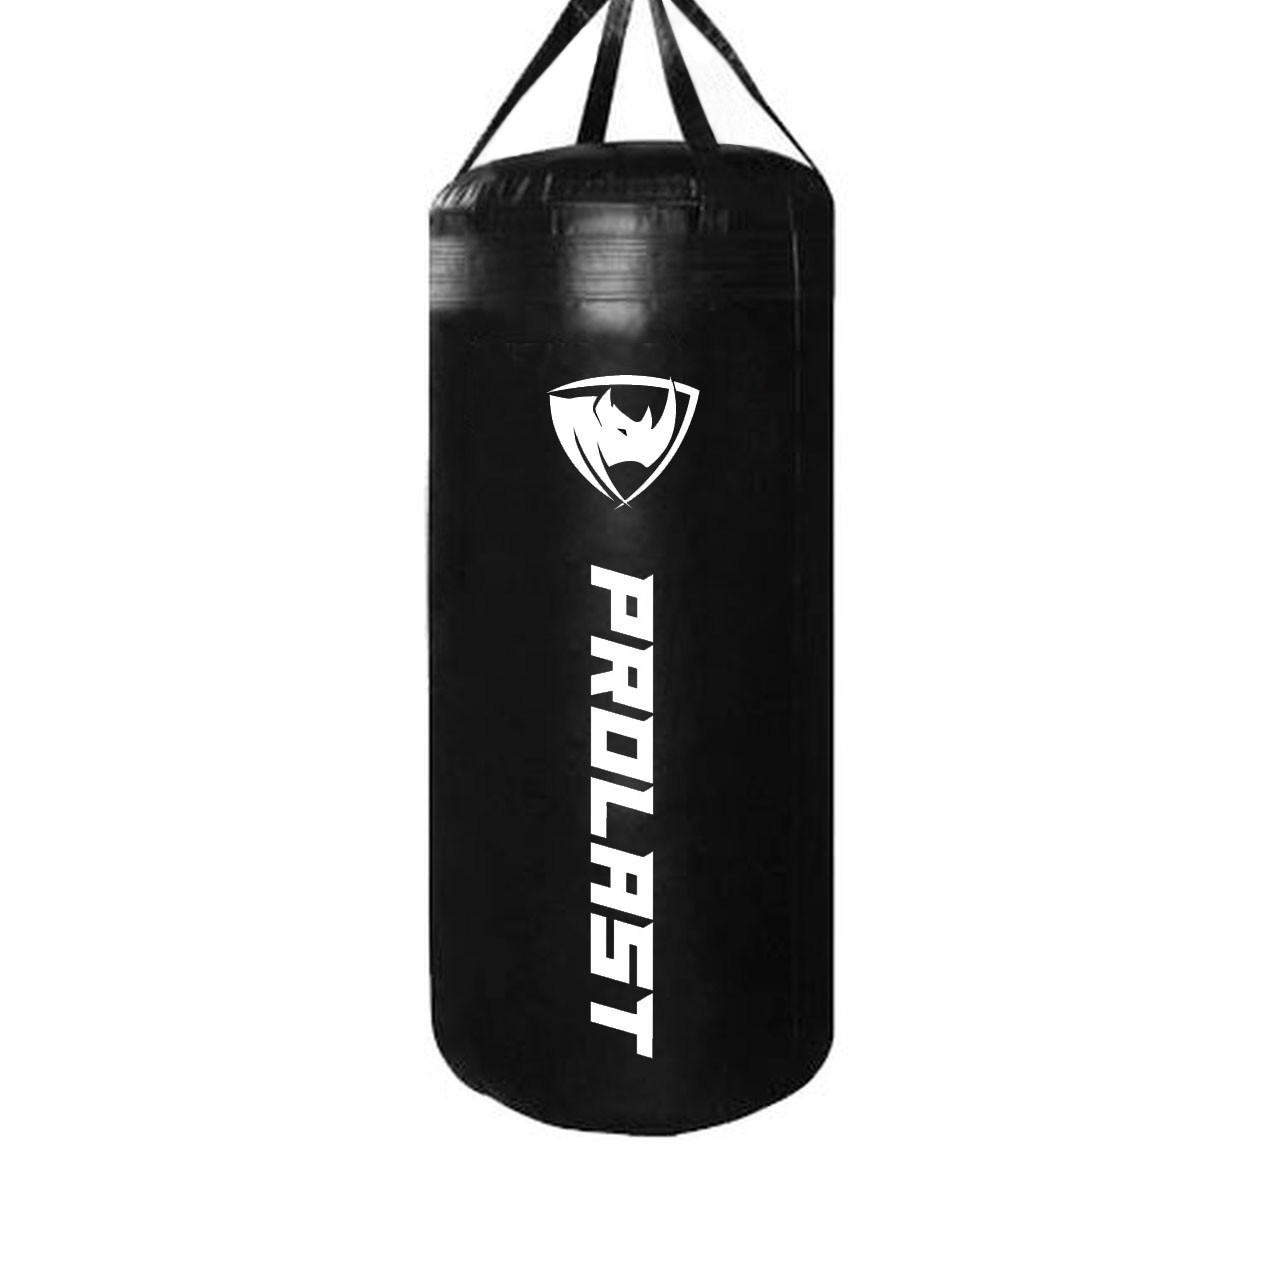 PROLAST Professional Heavy Bag Stand Small Size 